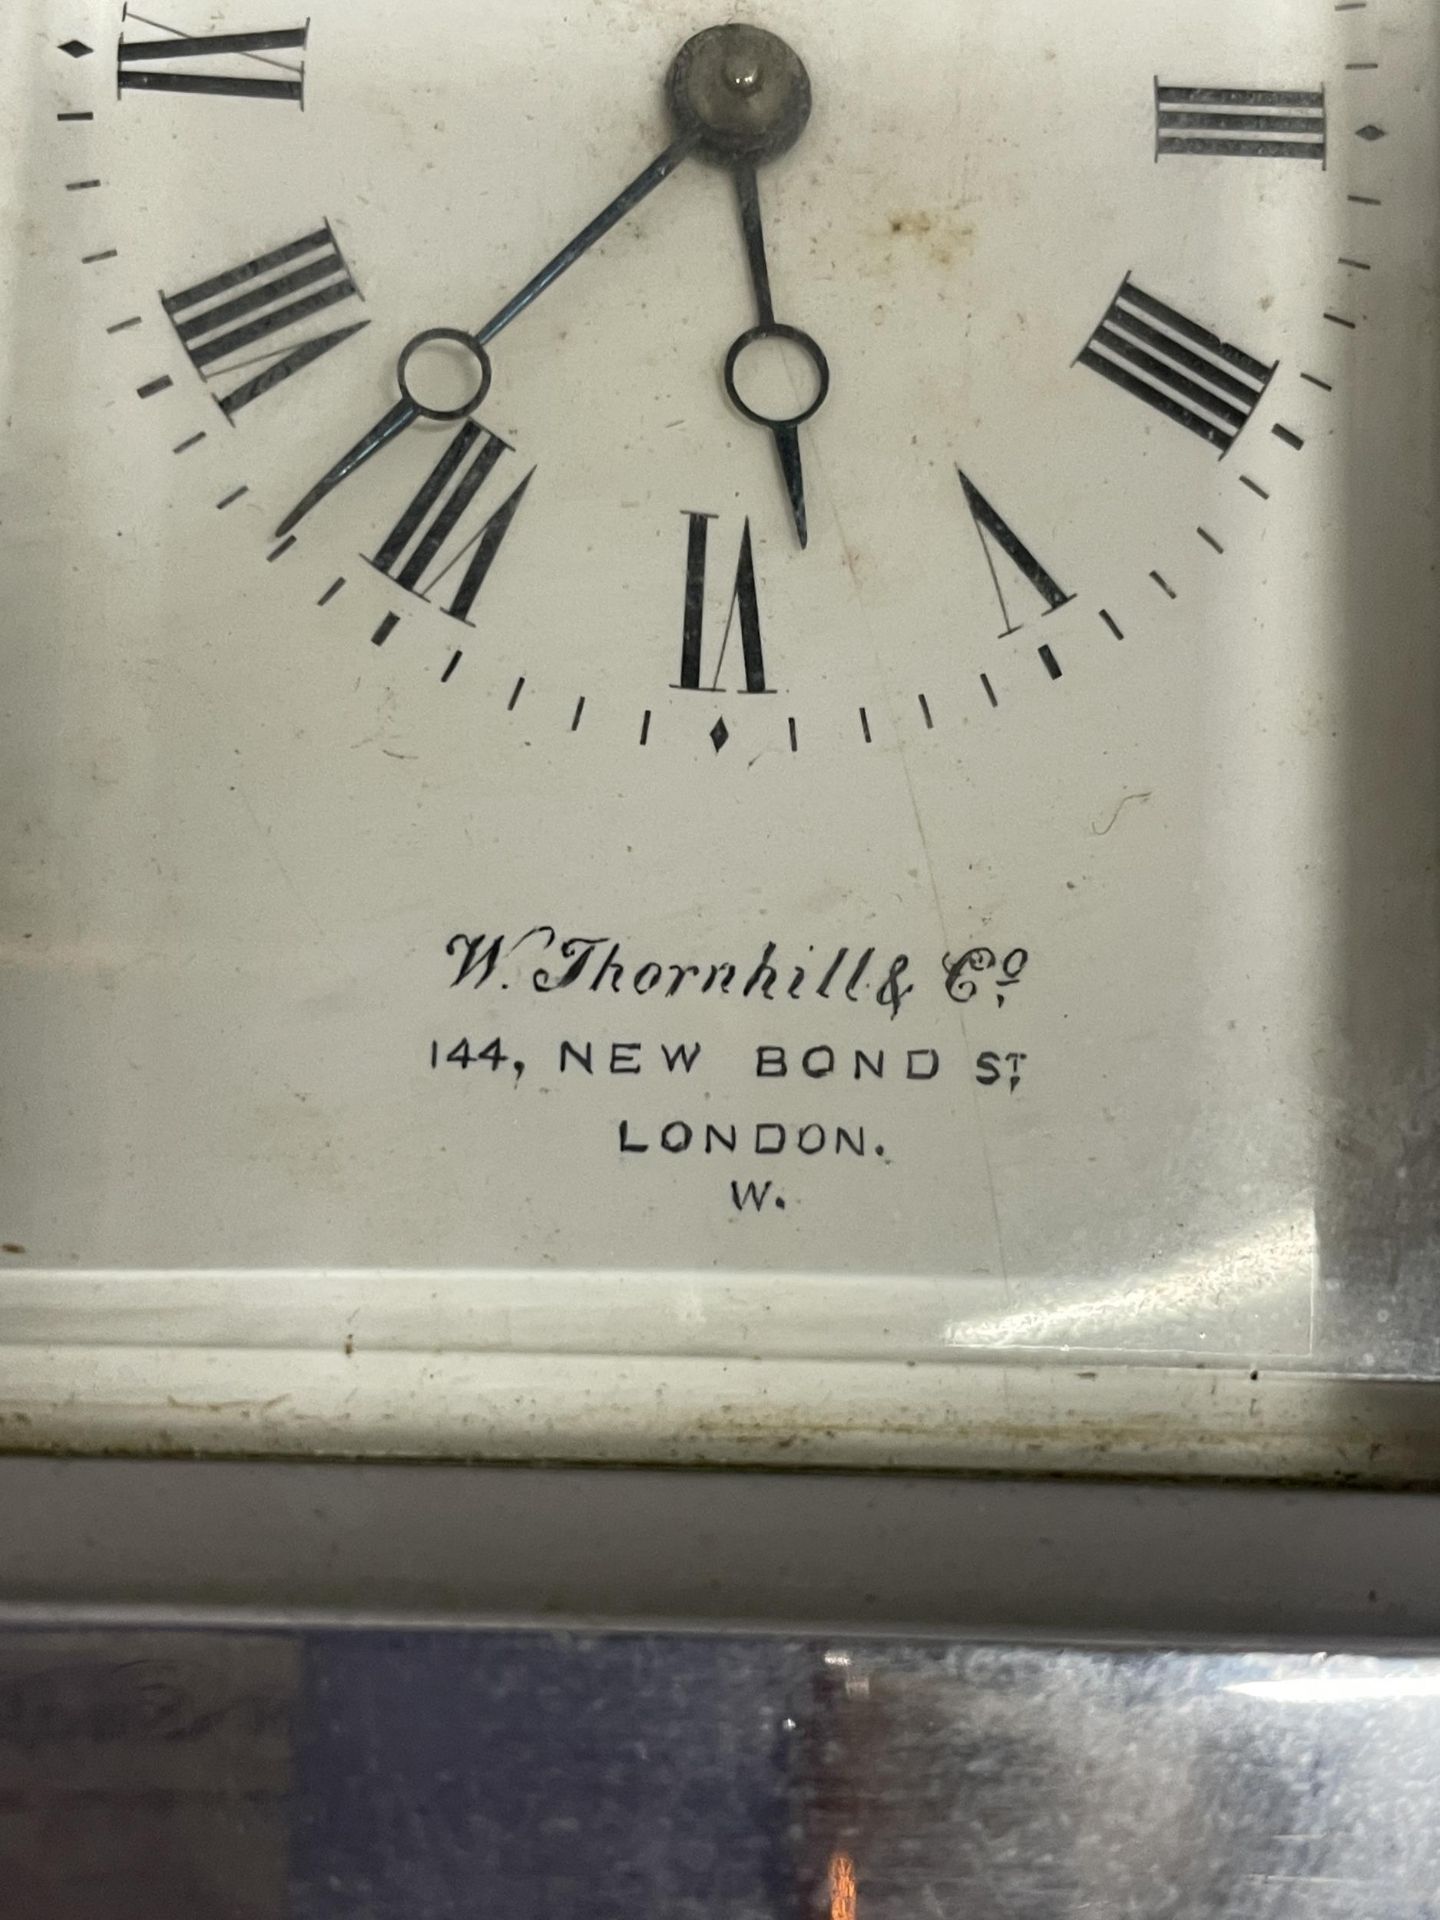 A W THORNHILL & C, 144 NEW BOND STREET, LONDON W CARRIAGE CLOCK - Image 4 of 4